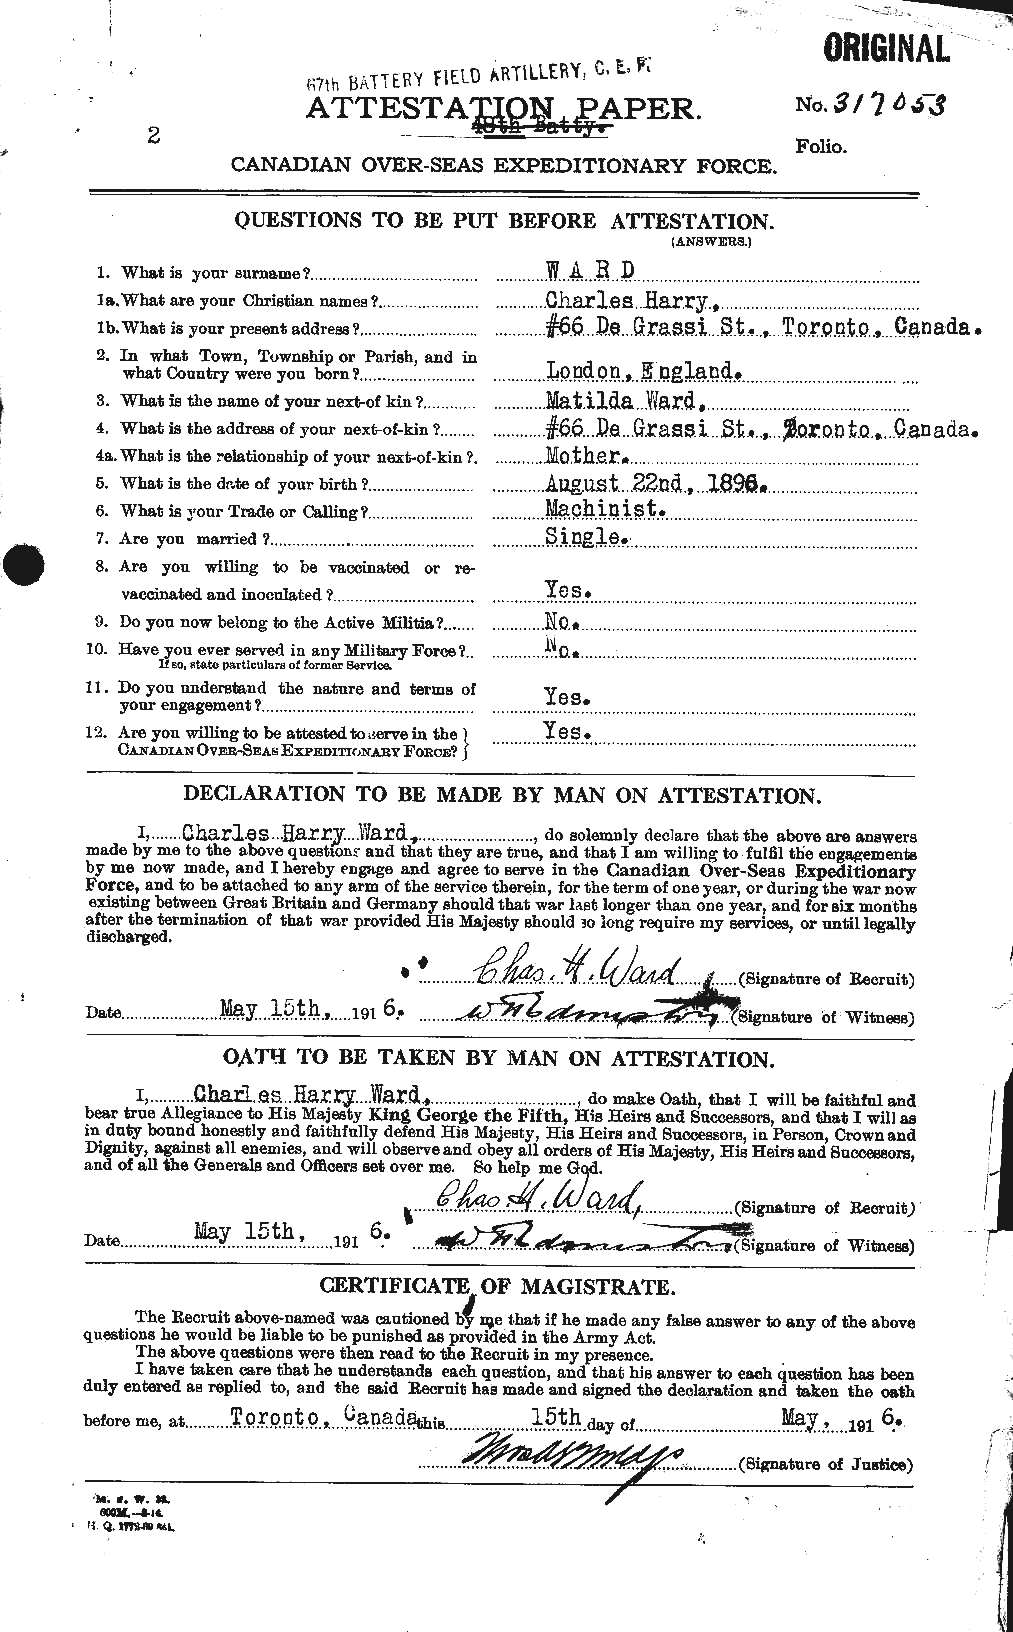 Personnel Records of the First World War - CEF 657586a